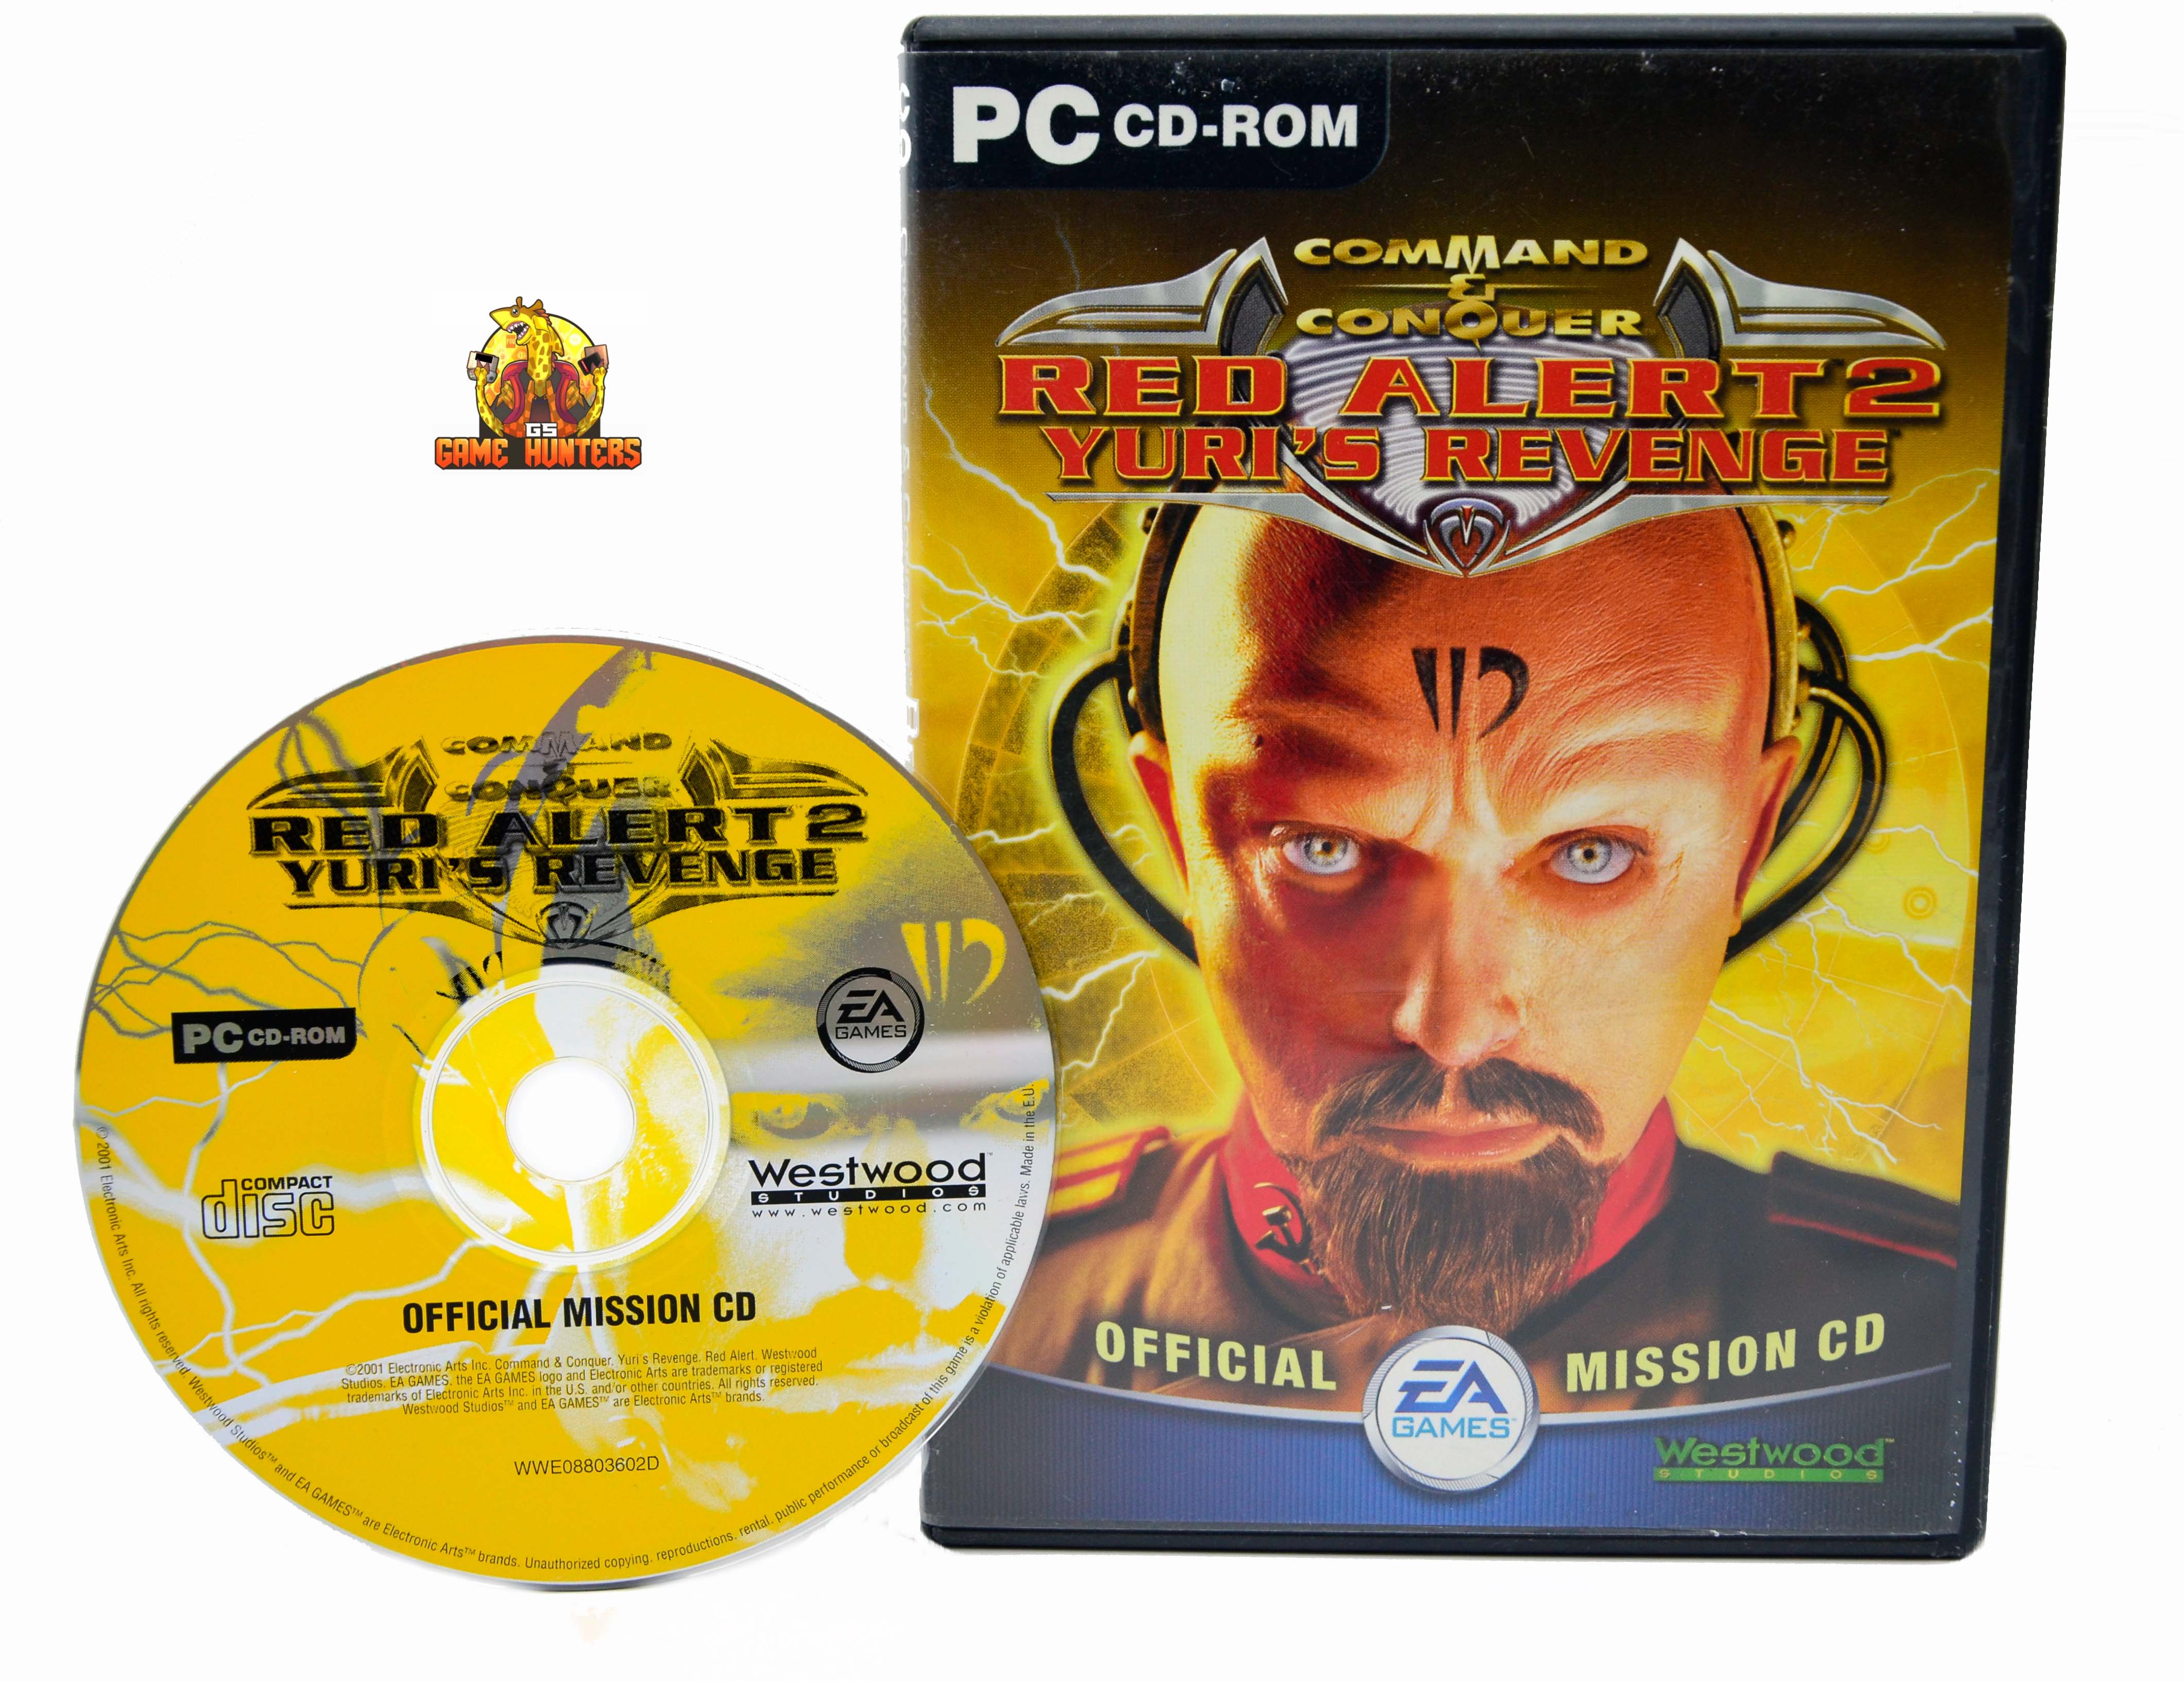 Command & Conquer Red Alert 2 Yuris Revenge Case & Disc.jpg  by GSGAMEHUNTERS